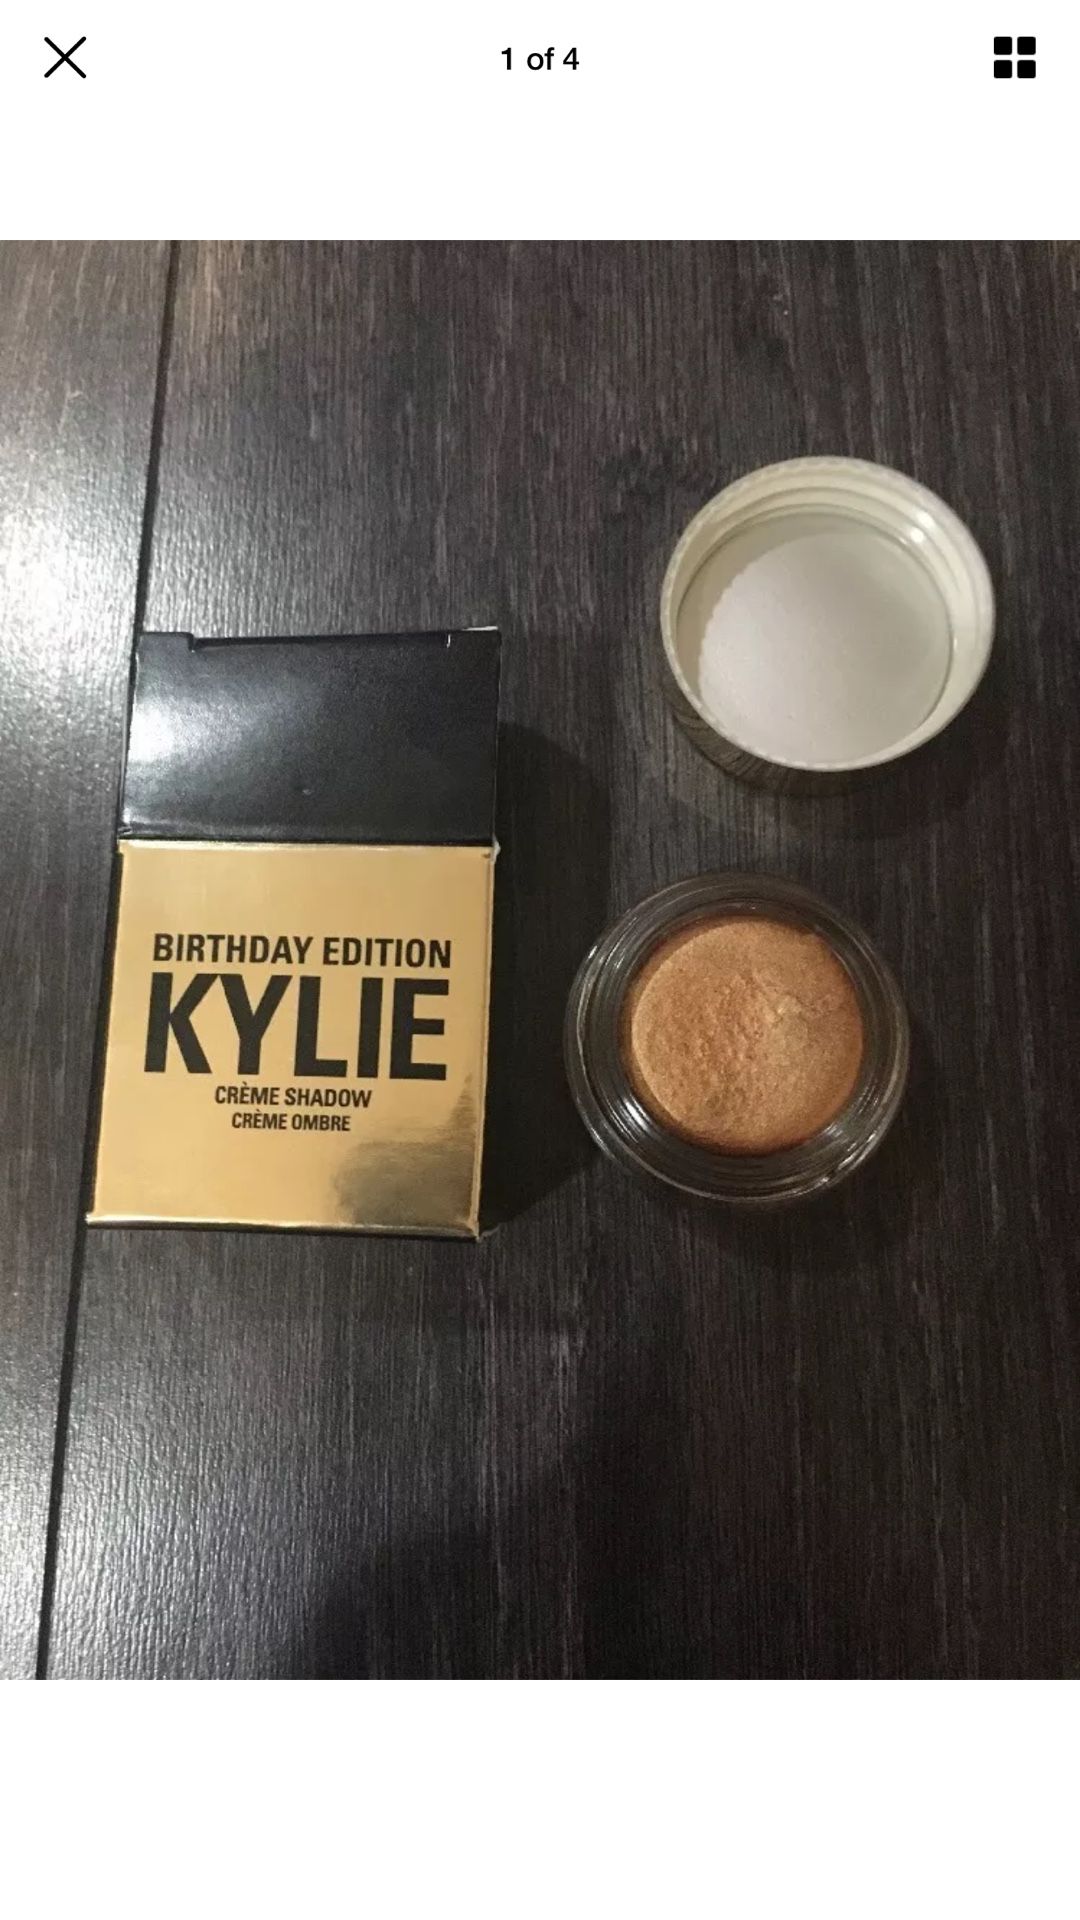 Kylie Jenner birthday edition cream shadows copper or rose gold